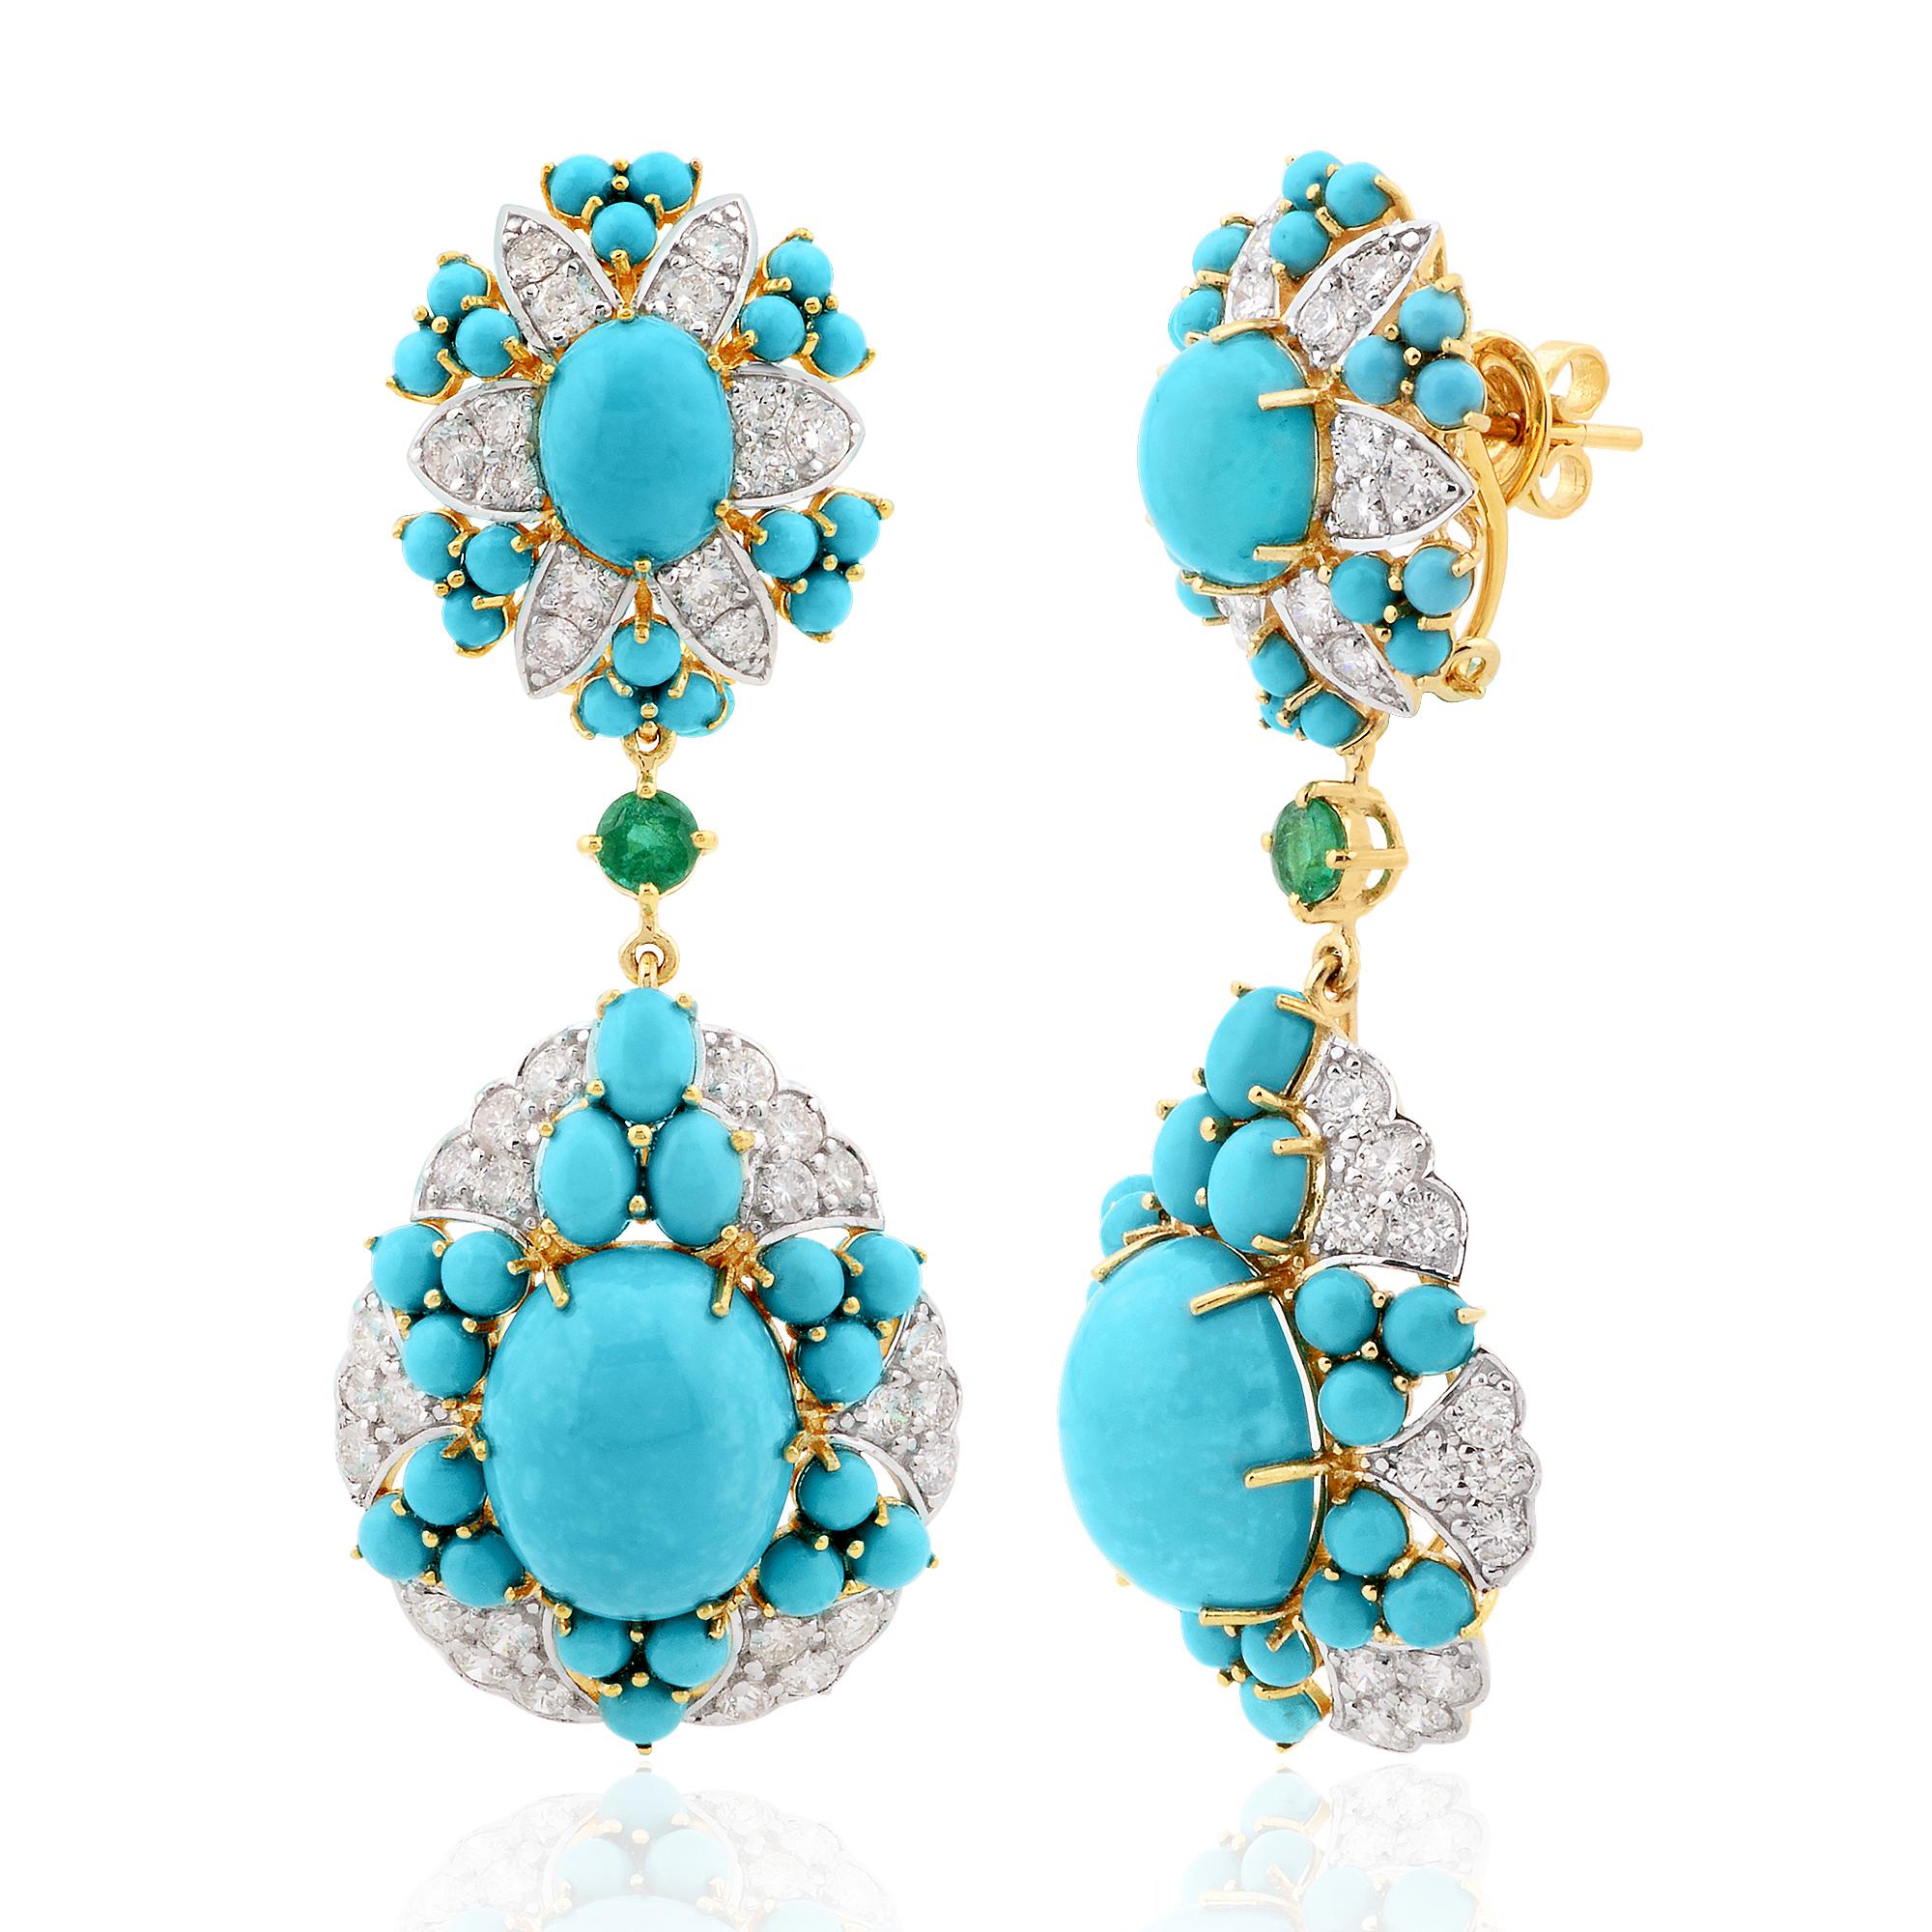 Item Code :- SEE-1742 (14k)
Gross Wt :- 19.90 gm
14k Yellow Gold Wt :- 14.36 gm
Diamond Wt :- 3.70 ct  ( AVERAGE DIAMOND CLARITY SI1-SI2 & COLOR H-I )
Turquoise & Emerald Wt :- 24.00 ct
Earrings Length :- 58 mm approx.

✦